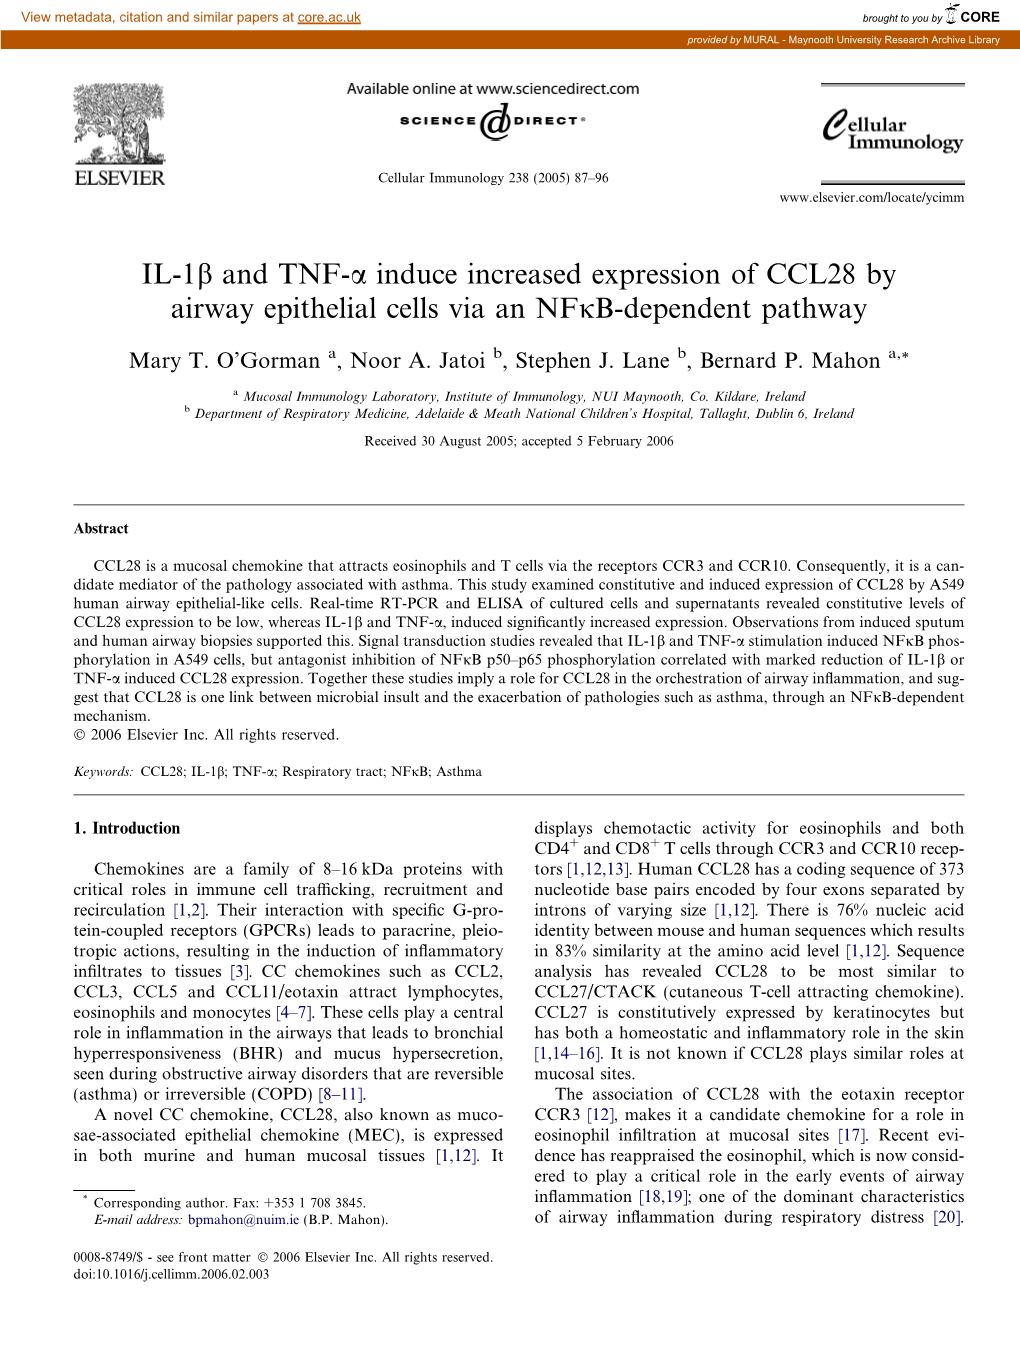 IL-1B and TNF-A Induce Increased Expression of CCL28 by Airway Epithelial Cells Via an Nfjb-Dependent Pathway